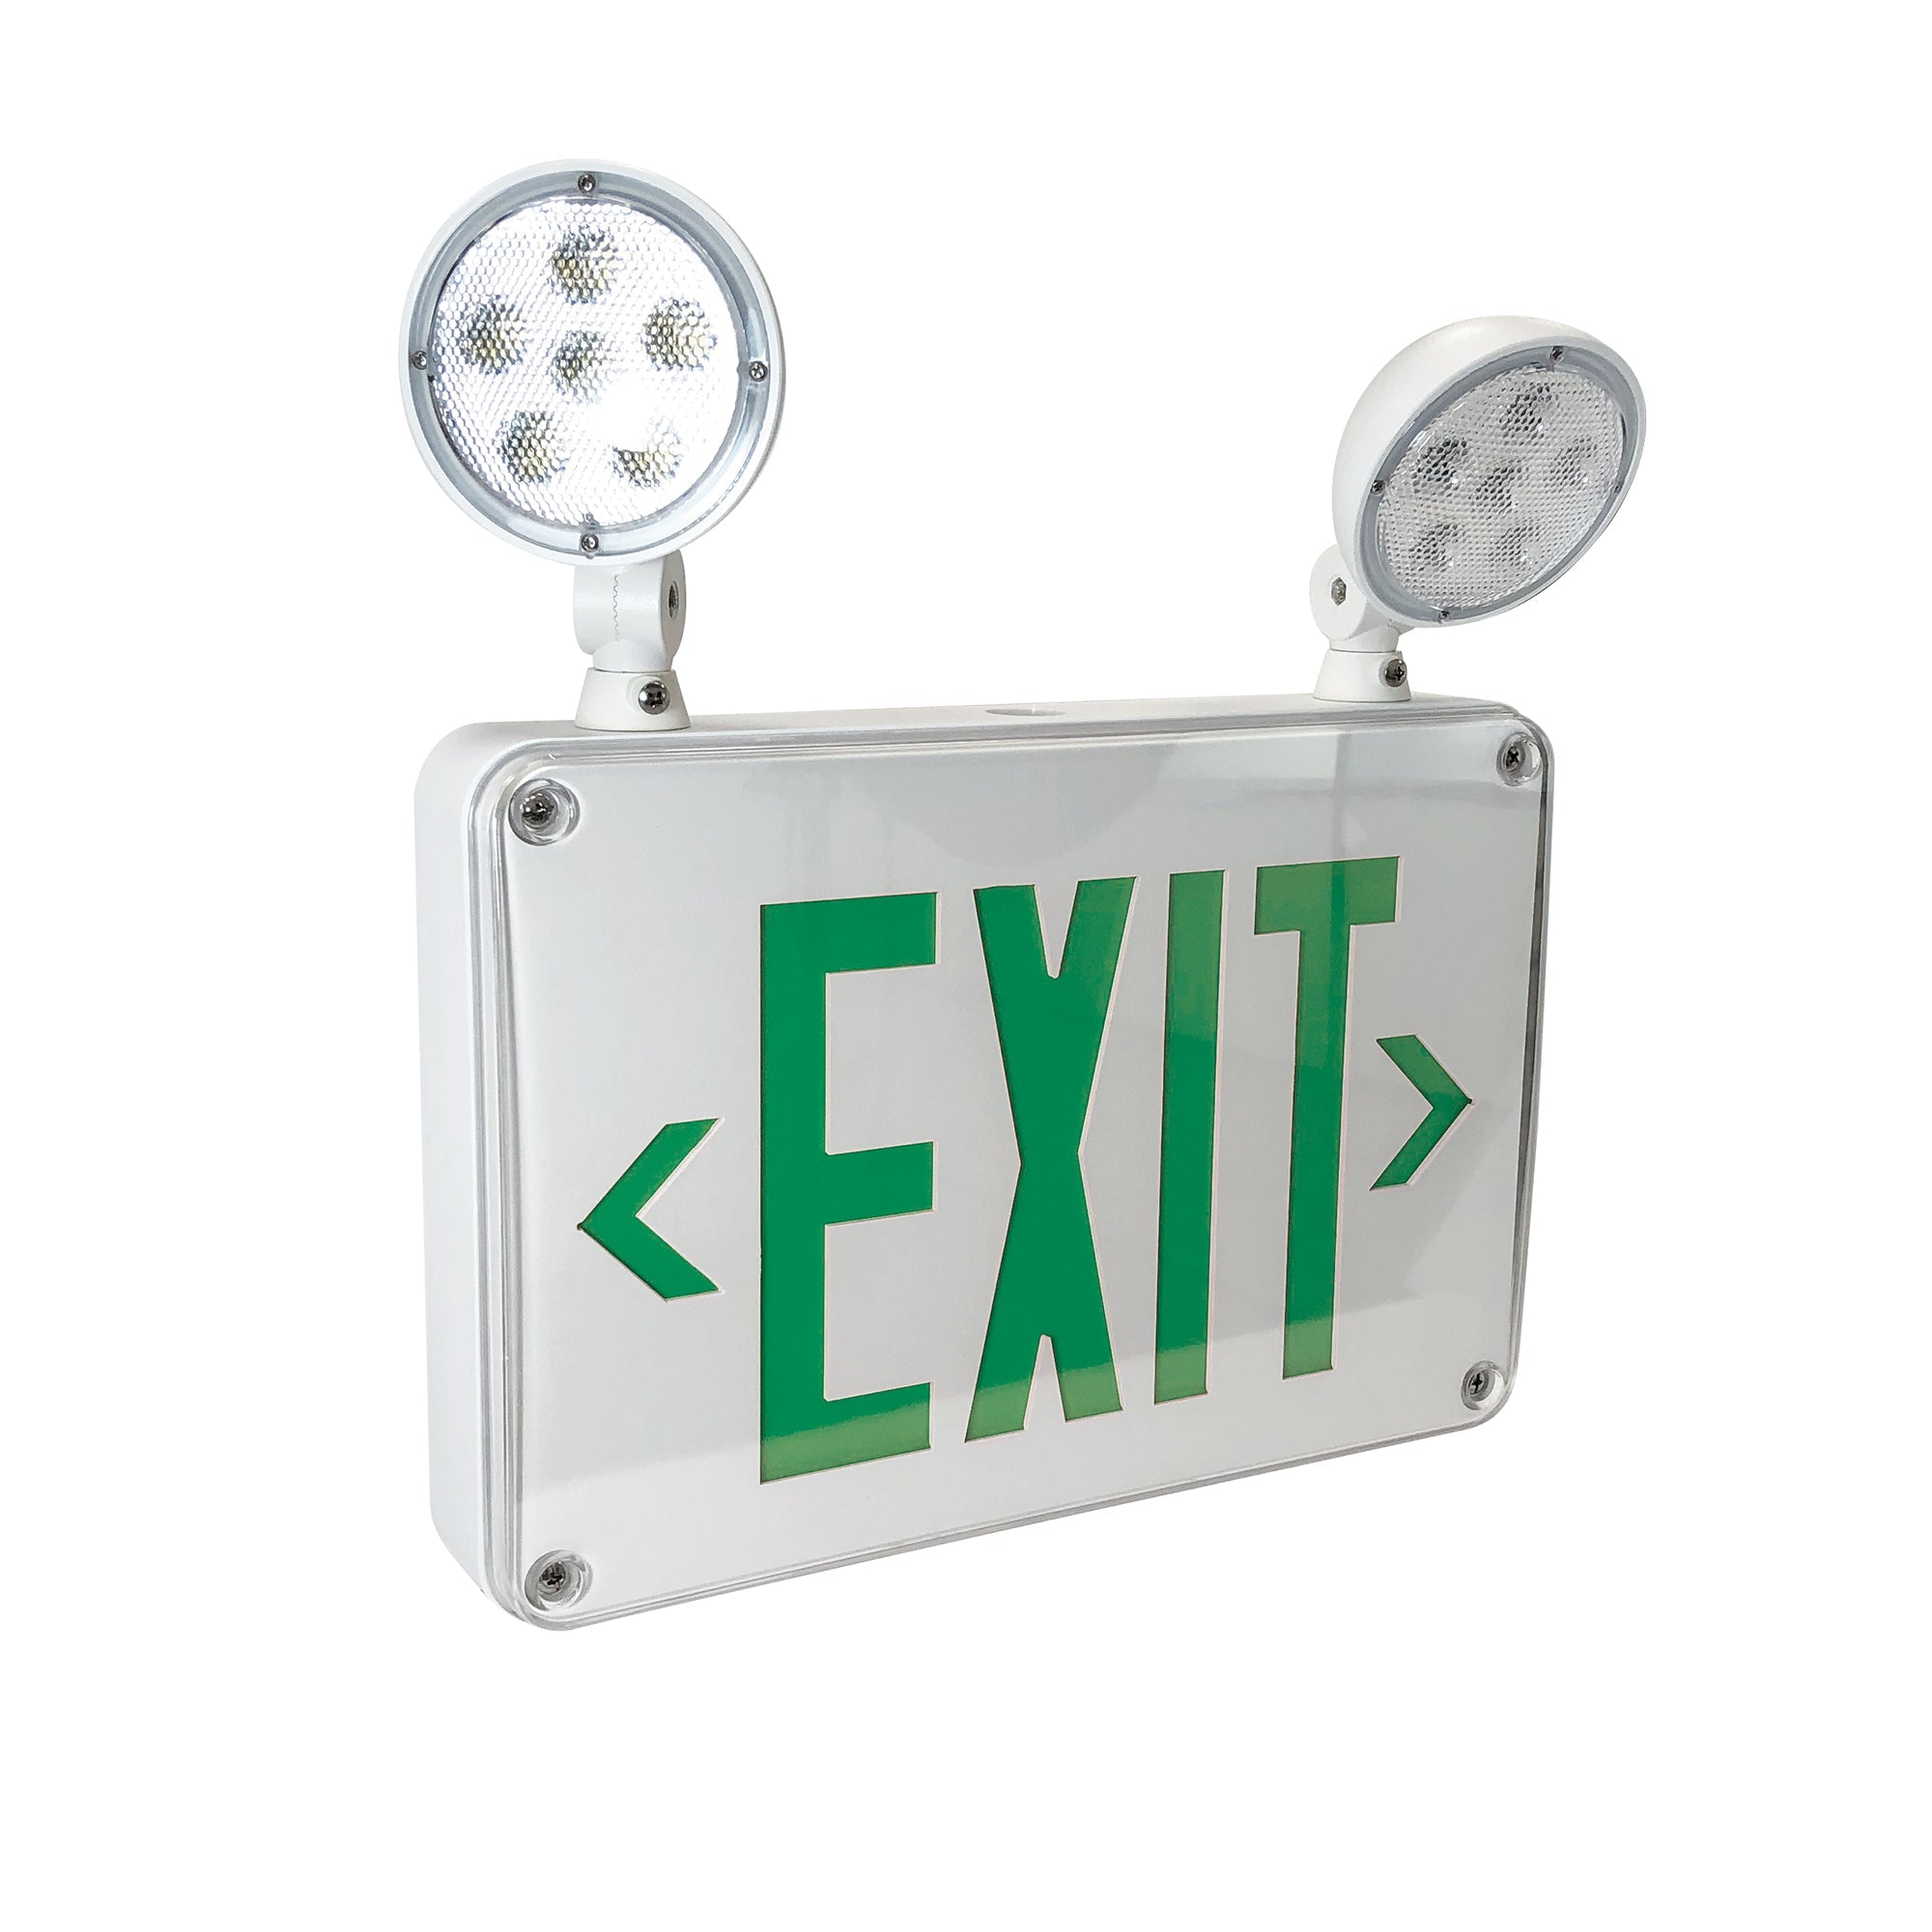 Nora Lighting NEX-720-LED/G-CC - Exit / Emergency - LED Self-Diagnostic Wet/Cold Location Exit & Emergency Sign w/ Battery Backup & Remote Capability, White Housing w/ Green Letters, Cold Weather Location